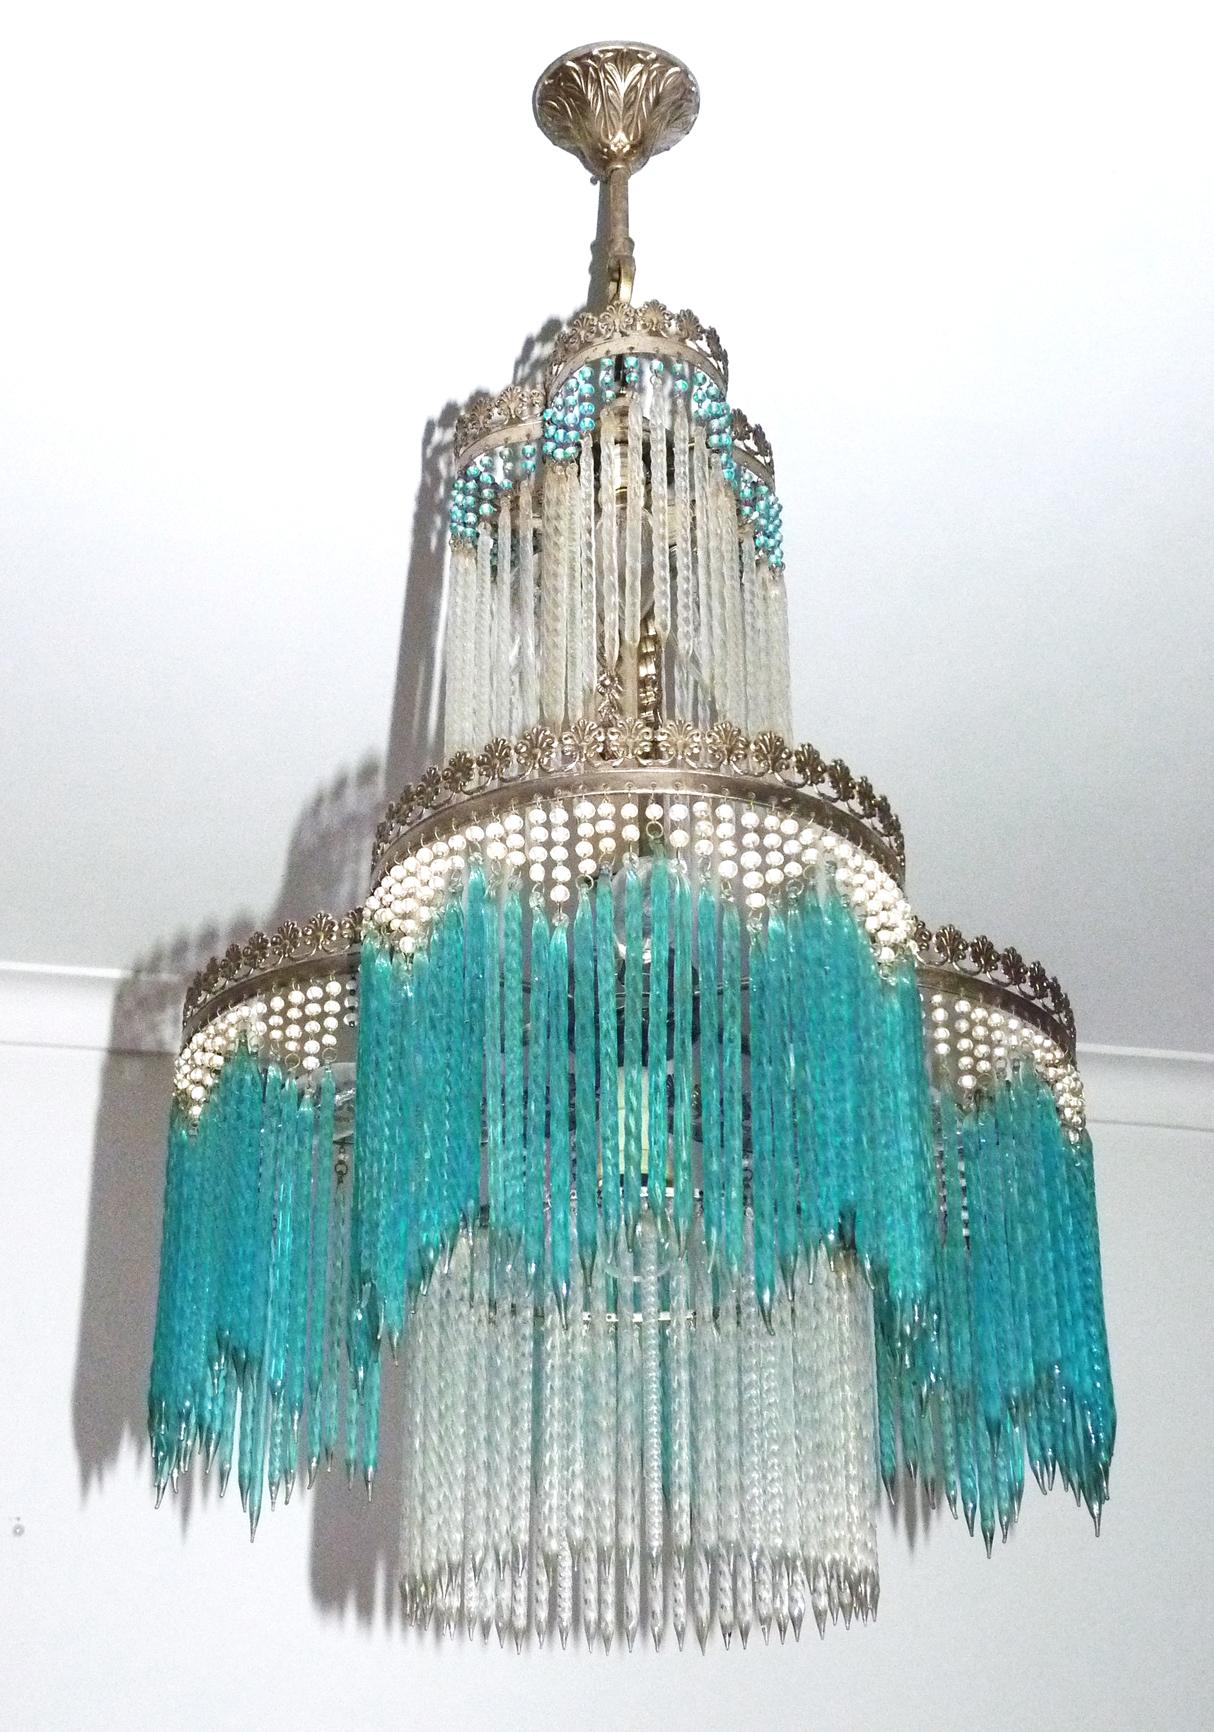 Fabulous French midcentury Art Deco/Art Nouveau chandelier in clear and blue beaded glass.
Measures: Diameter 45 cm
Height 85 cm.
Seven-light bulbs (6-E14 + 1 E27) / Good working condition/European wiring.
Your item will be carefully packed.